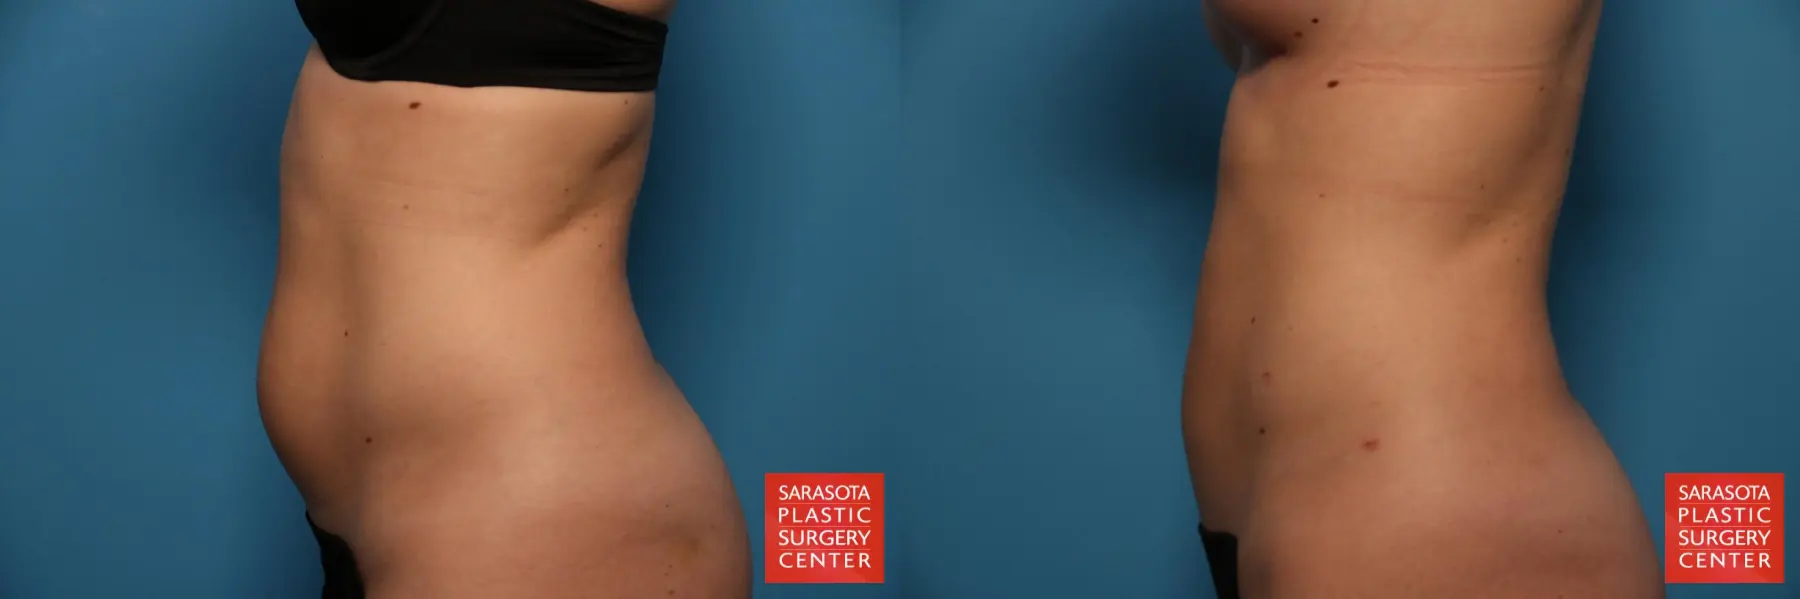 Liposuction: Patient 10 - Before and After 3